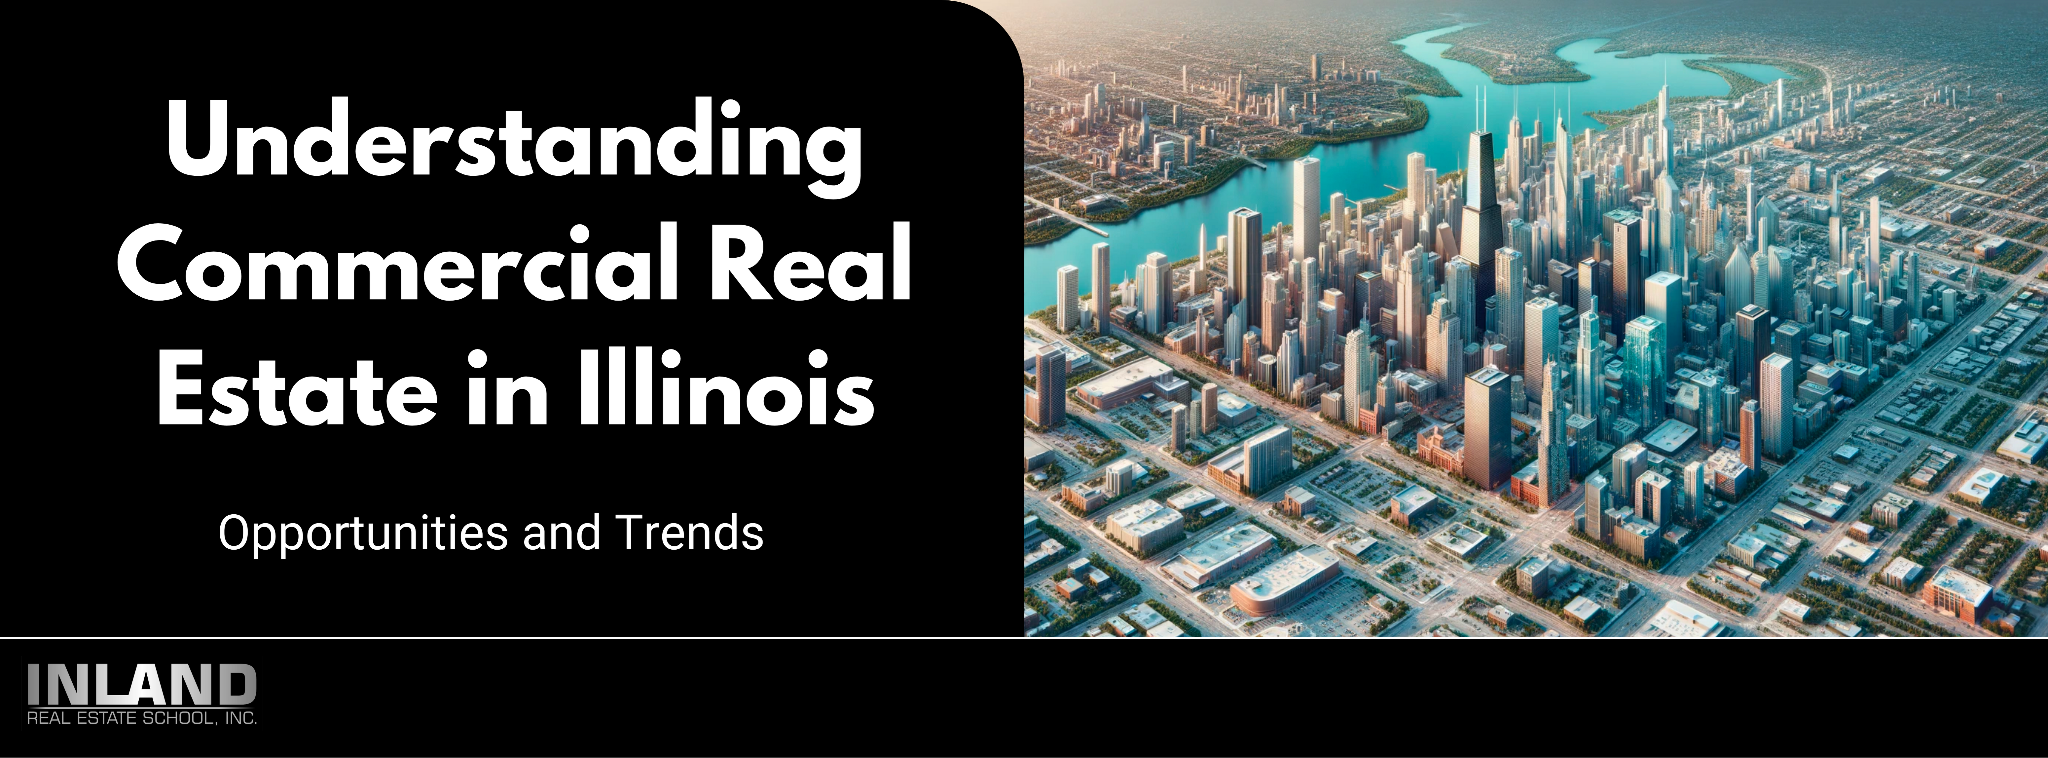 Understanding Commercial Real Estate in Illinois: Opportunities and Trends